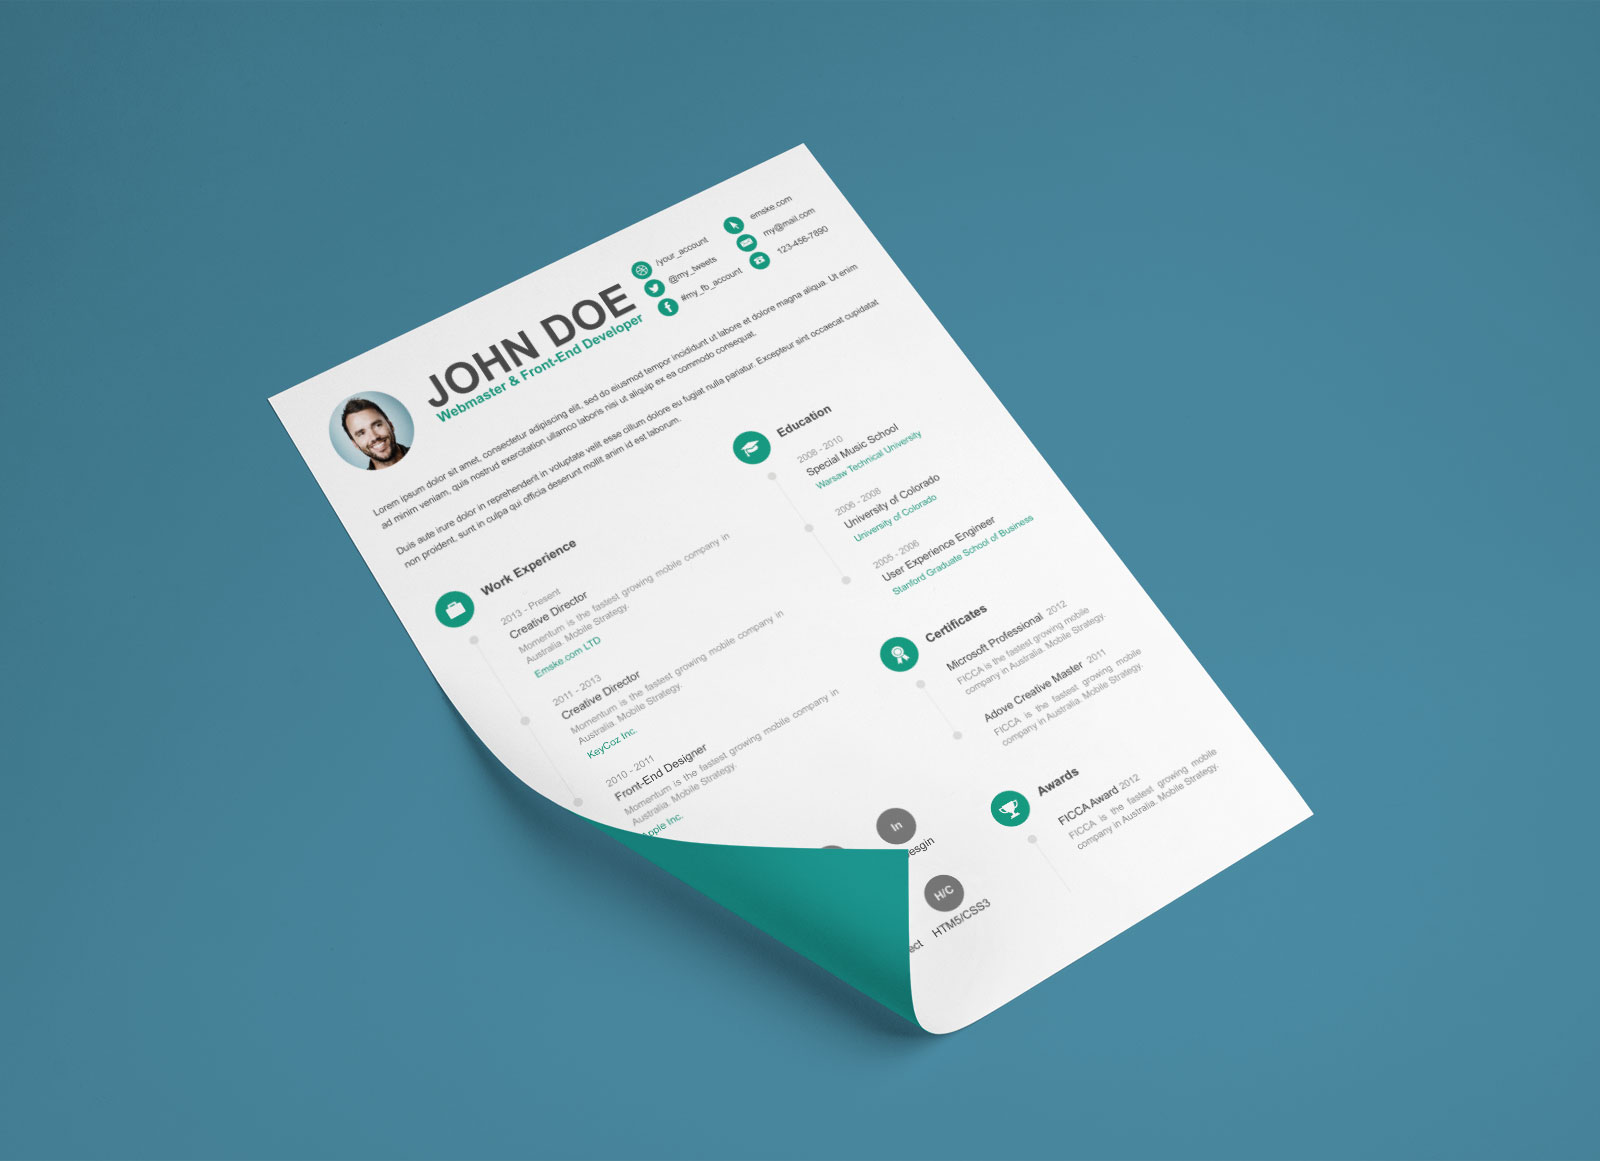 free psd resume cv template for webmasters  u0026 front end